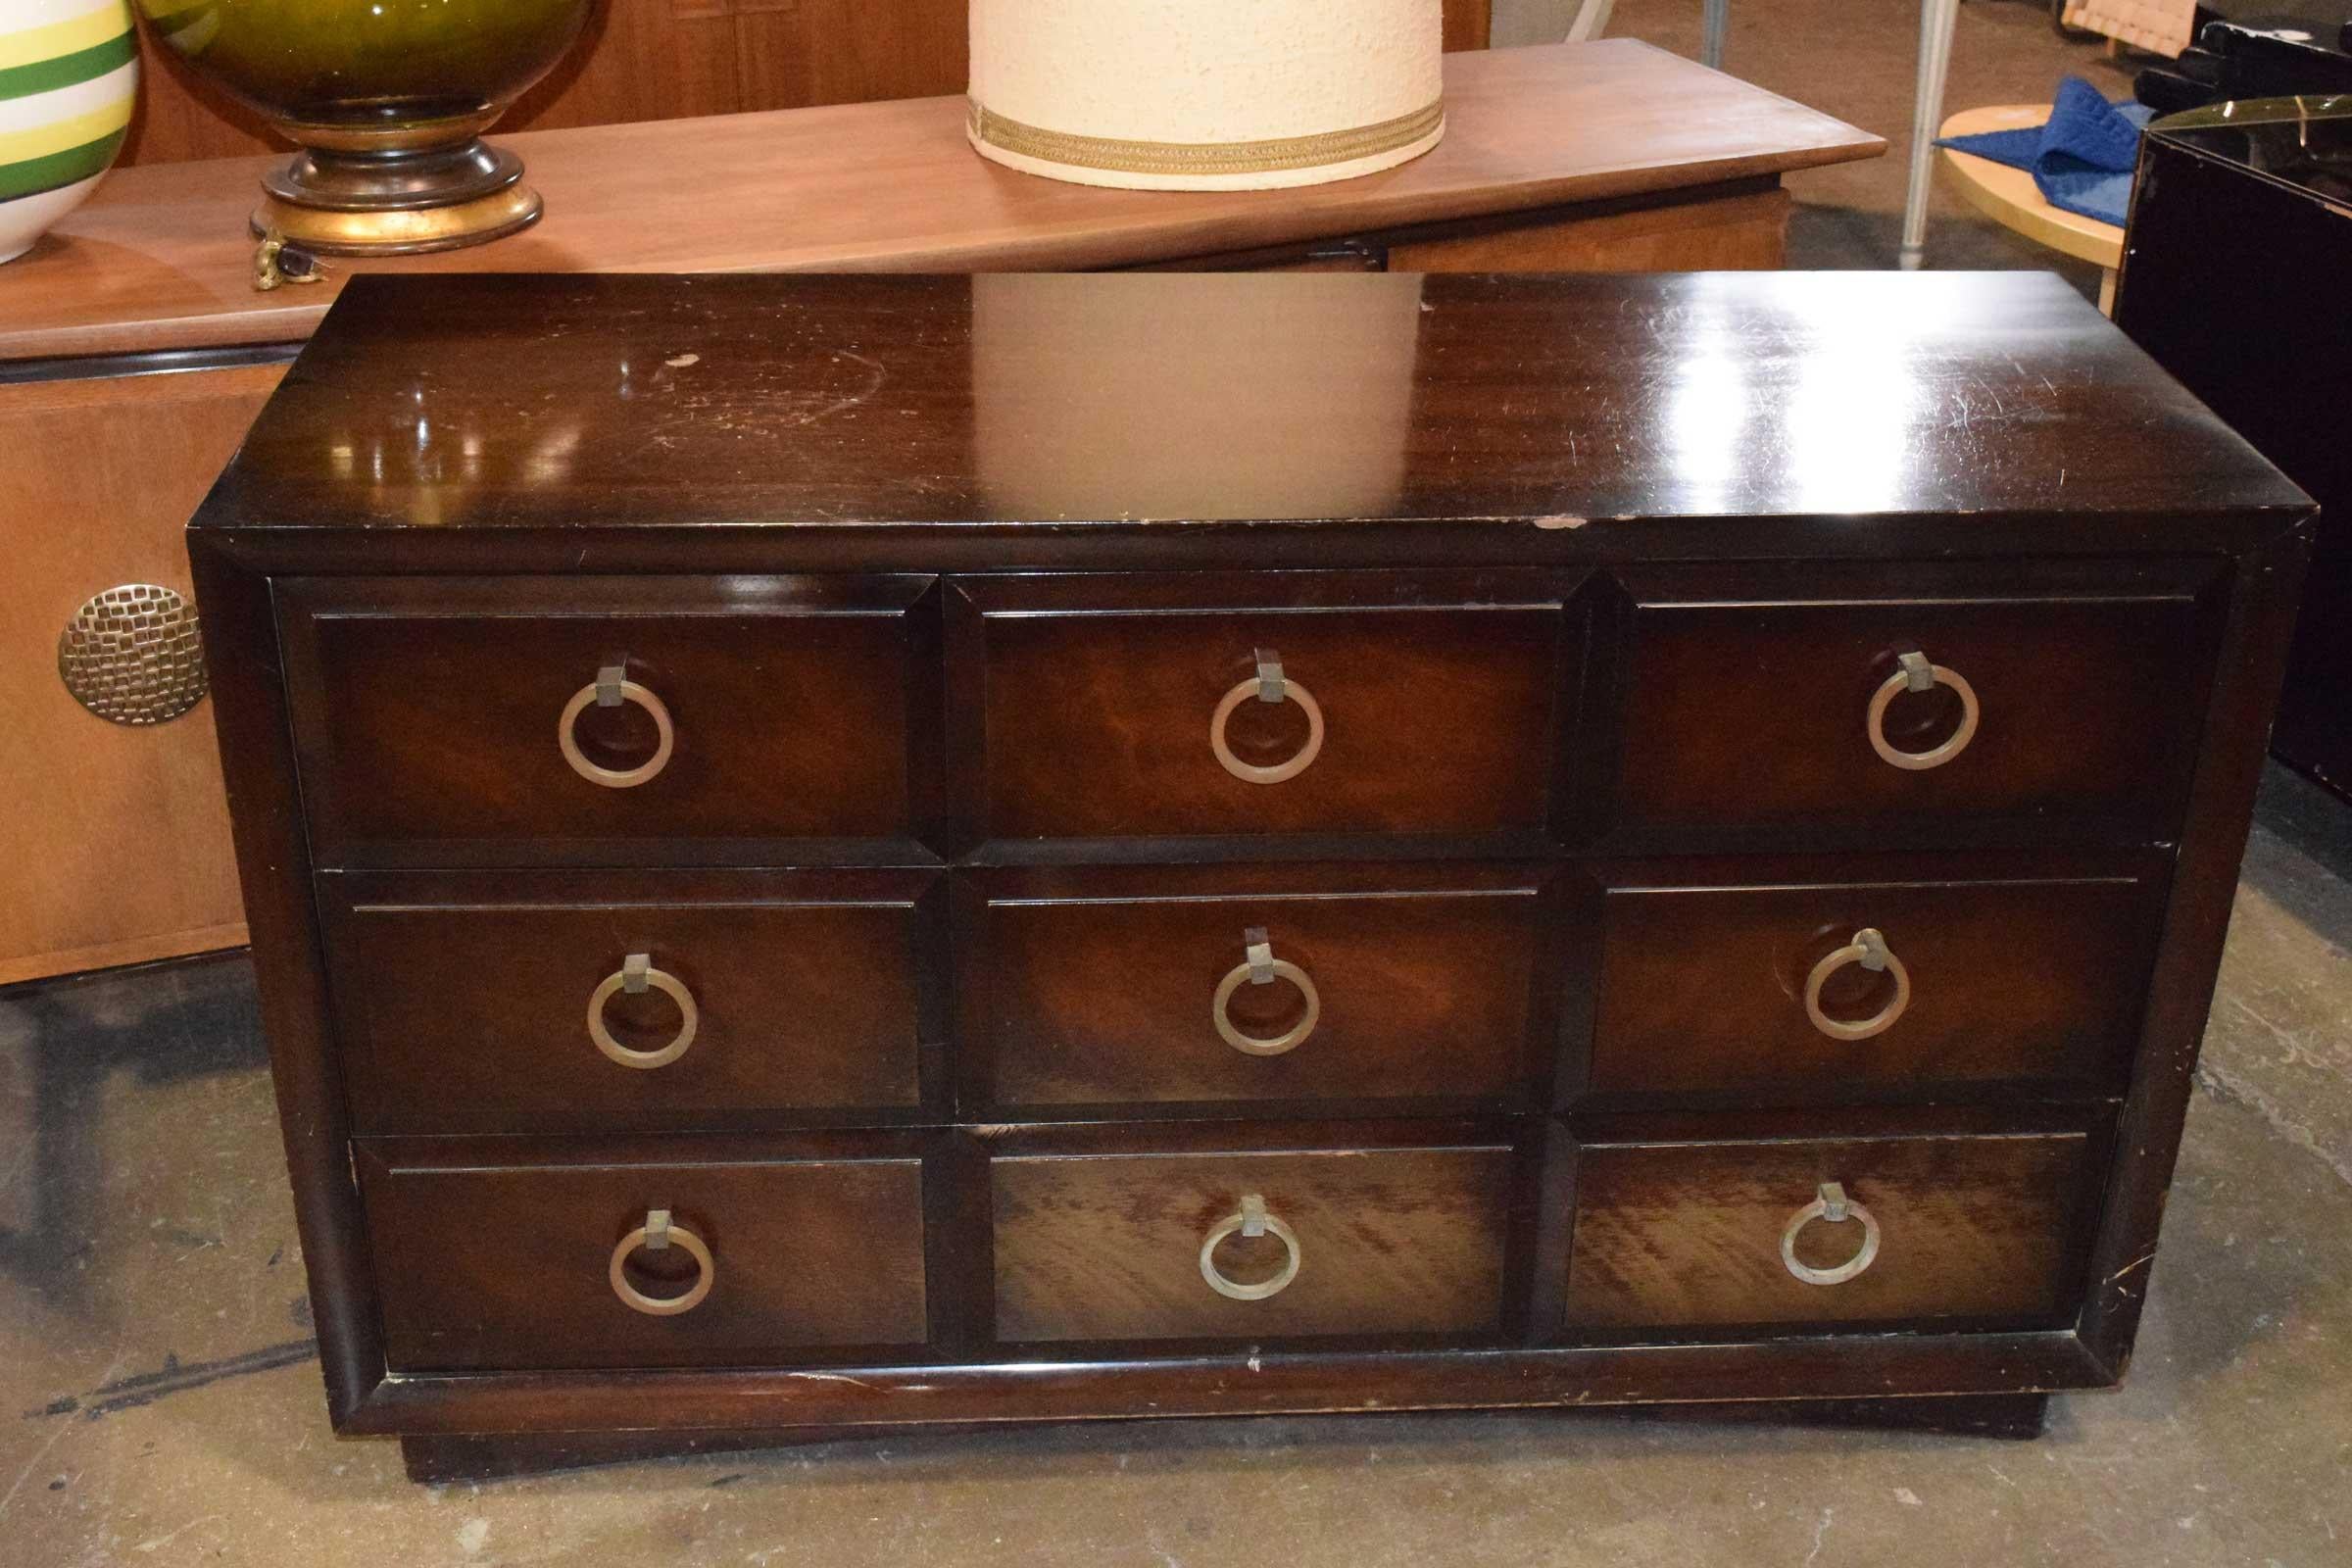 Beautifully made chest of drawers, on casters for easy moving. This make a great dresser or chest for anywhere needed including an entry. Chests has five drawers with two on first two rows and bottom is a single drawer. Hardware is solid brass.